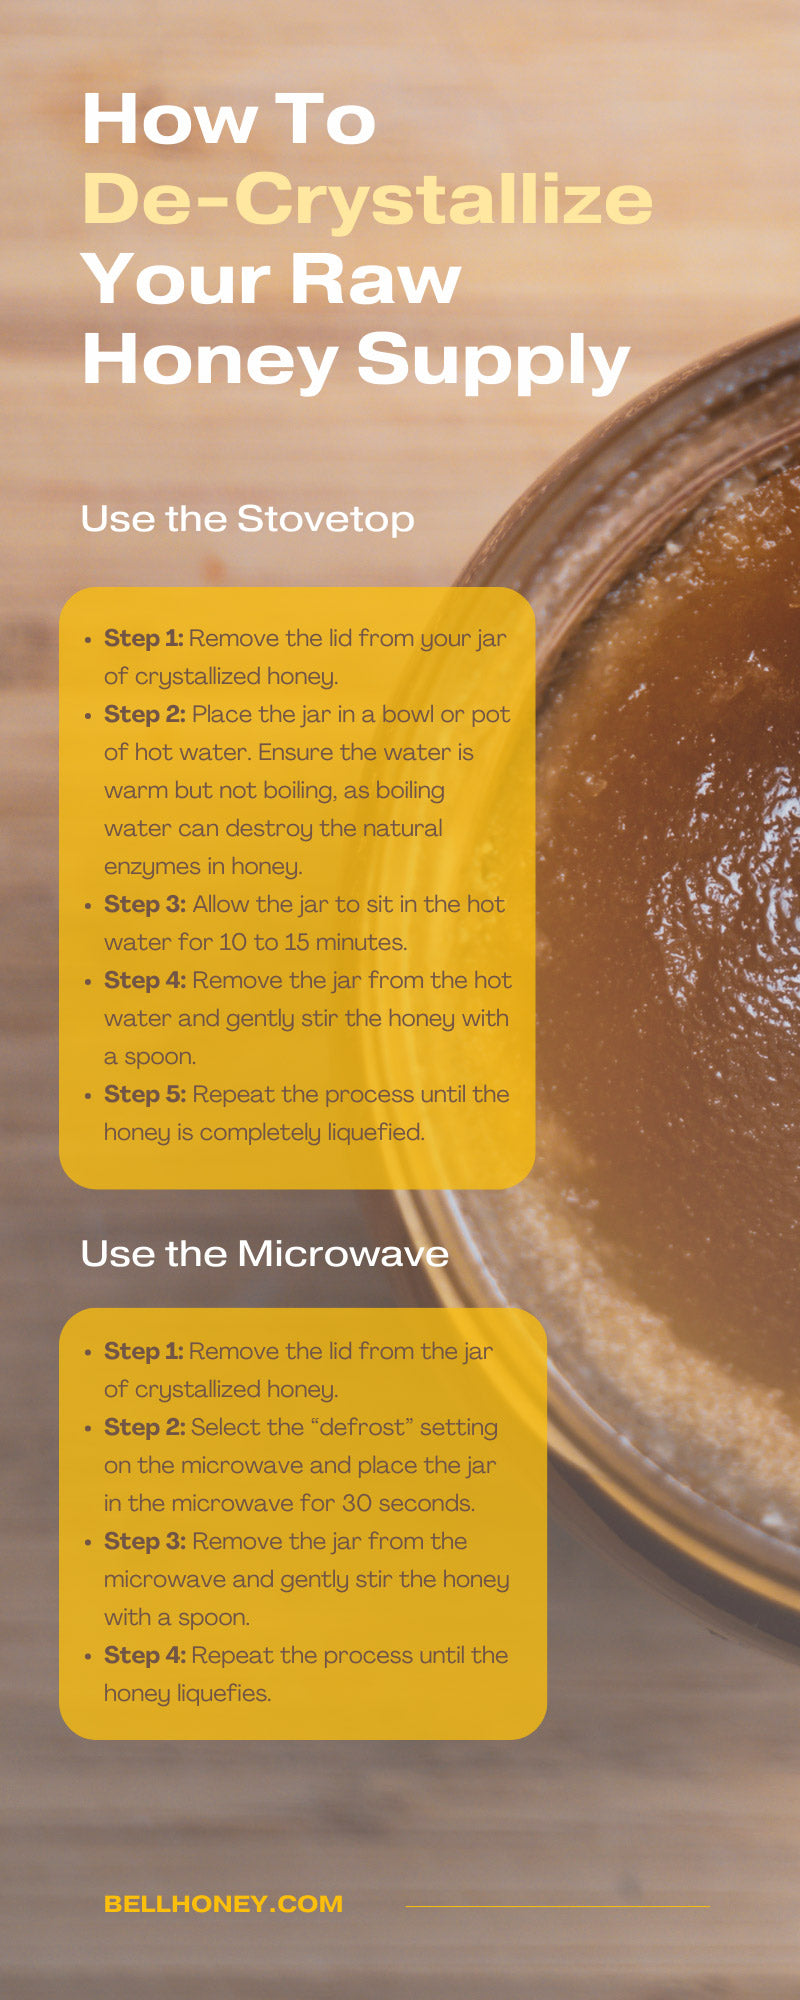 How To De-Crystallize Your Raw Honey Supply